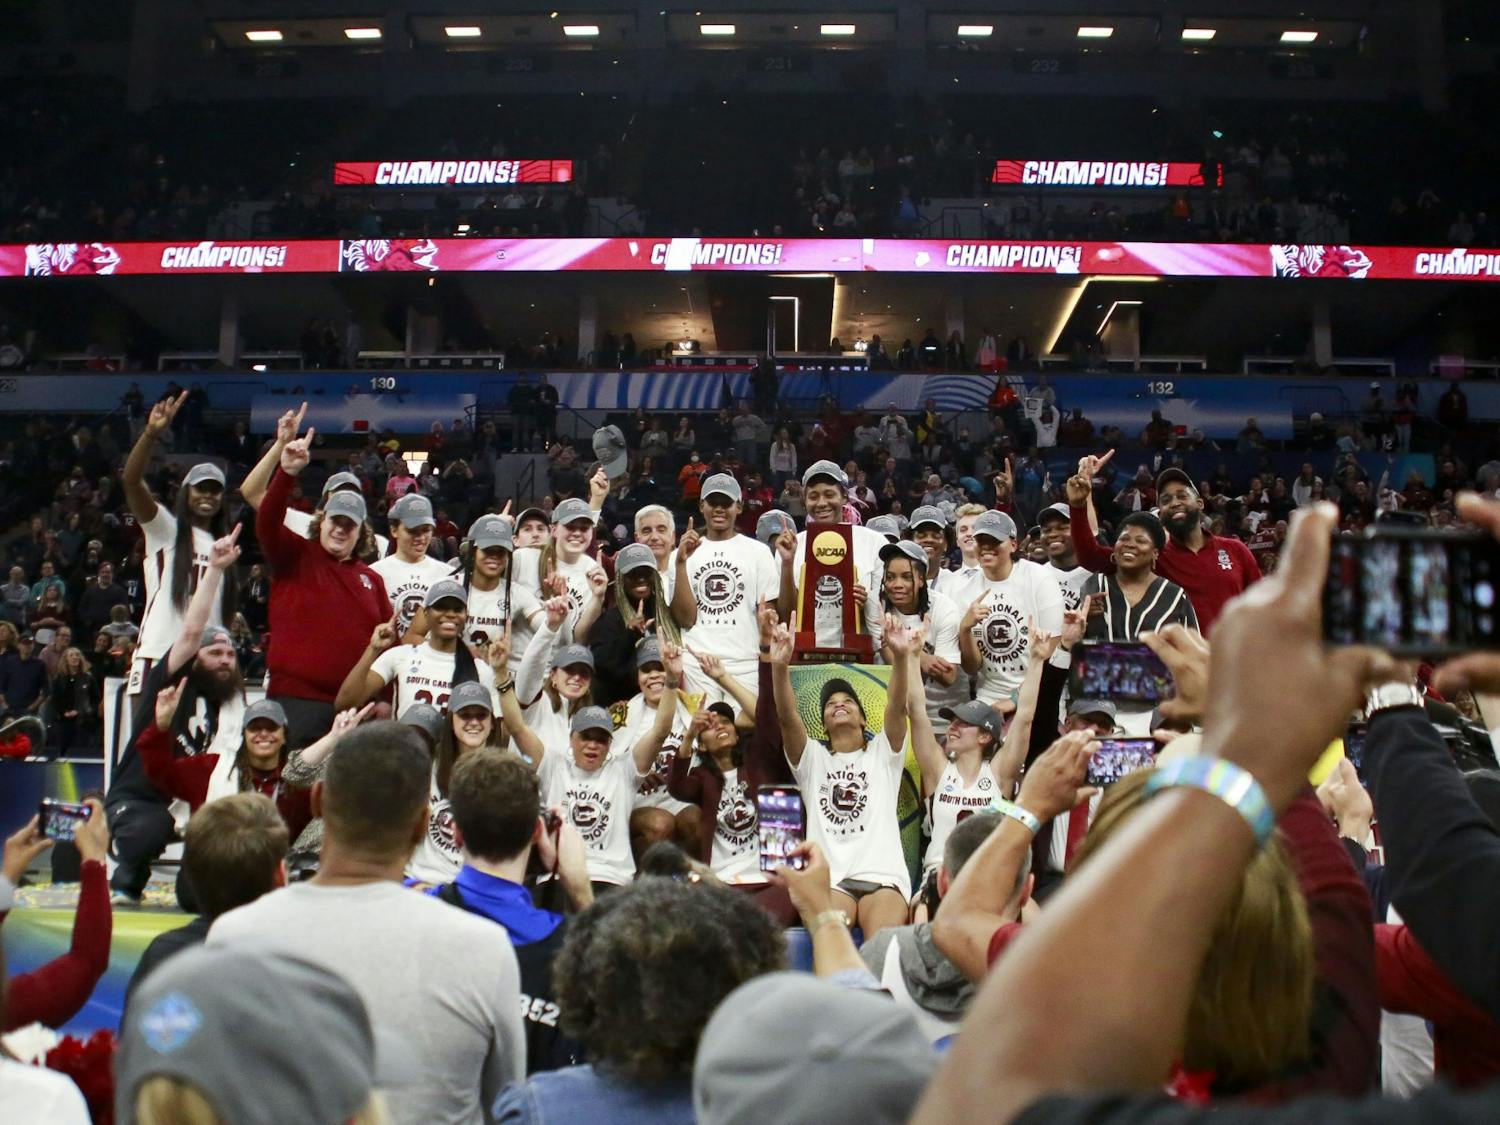 South Carolina womens basketball celebrates the Gamecocks' 64-49 victory over University of Connecticut, winning the 2022 National Championship on April 3, 2022.